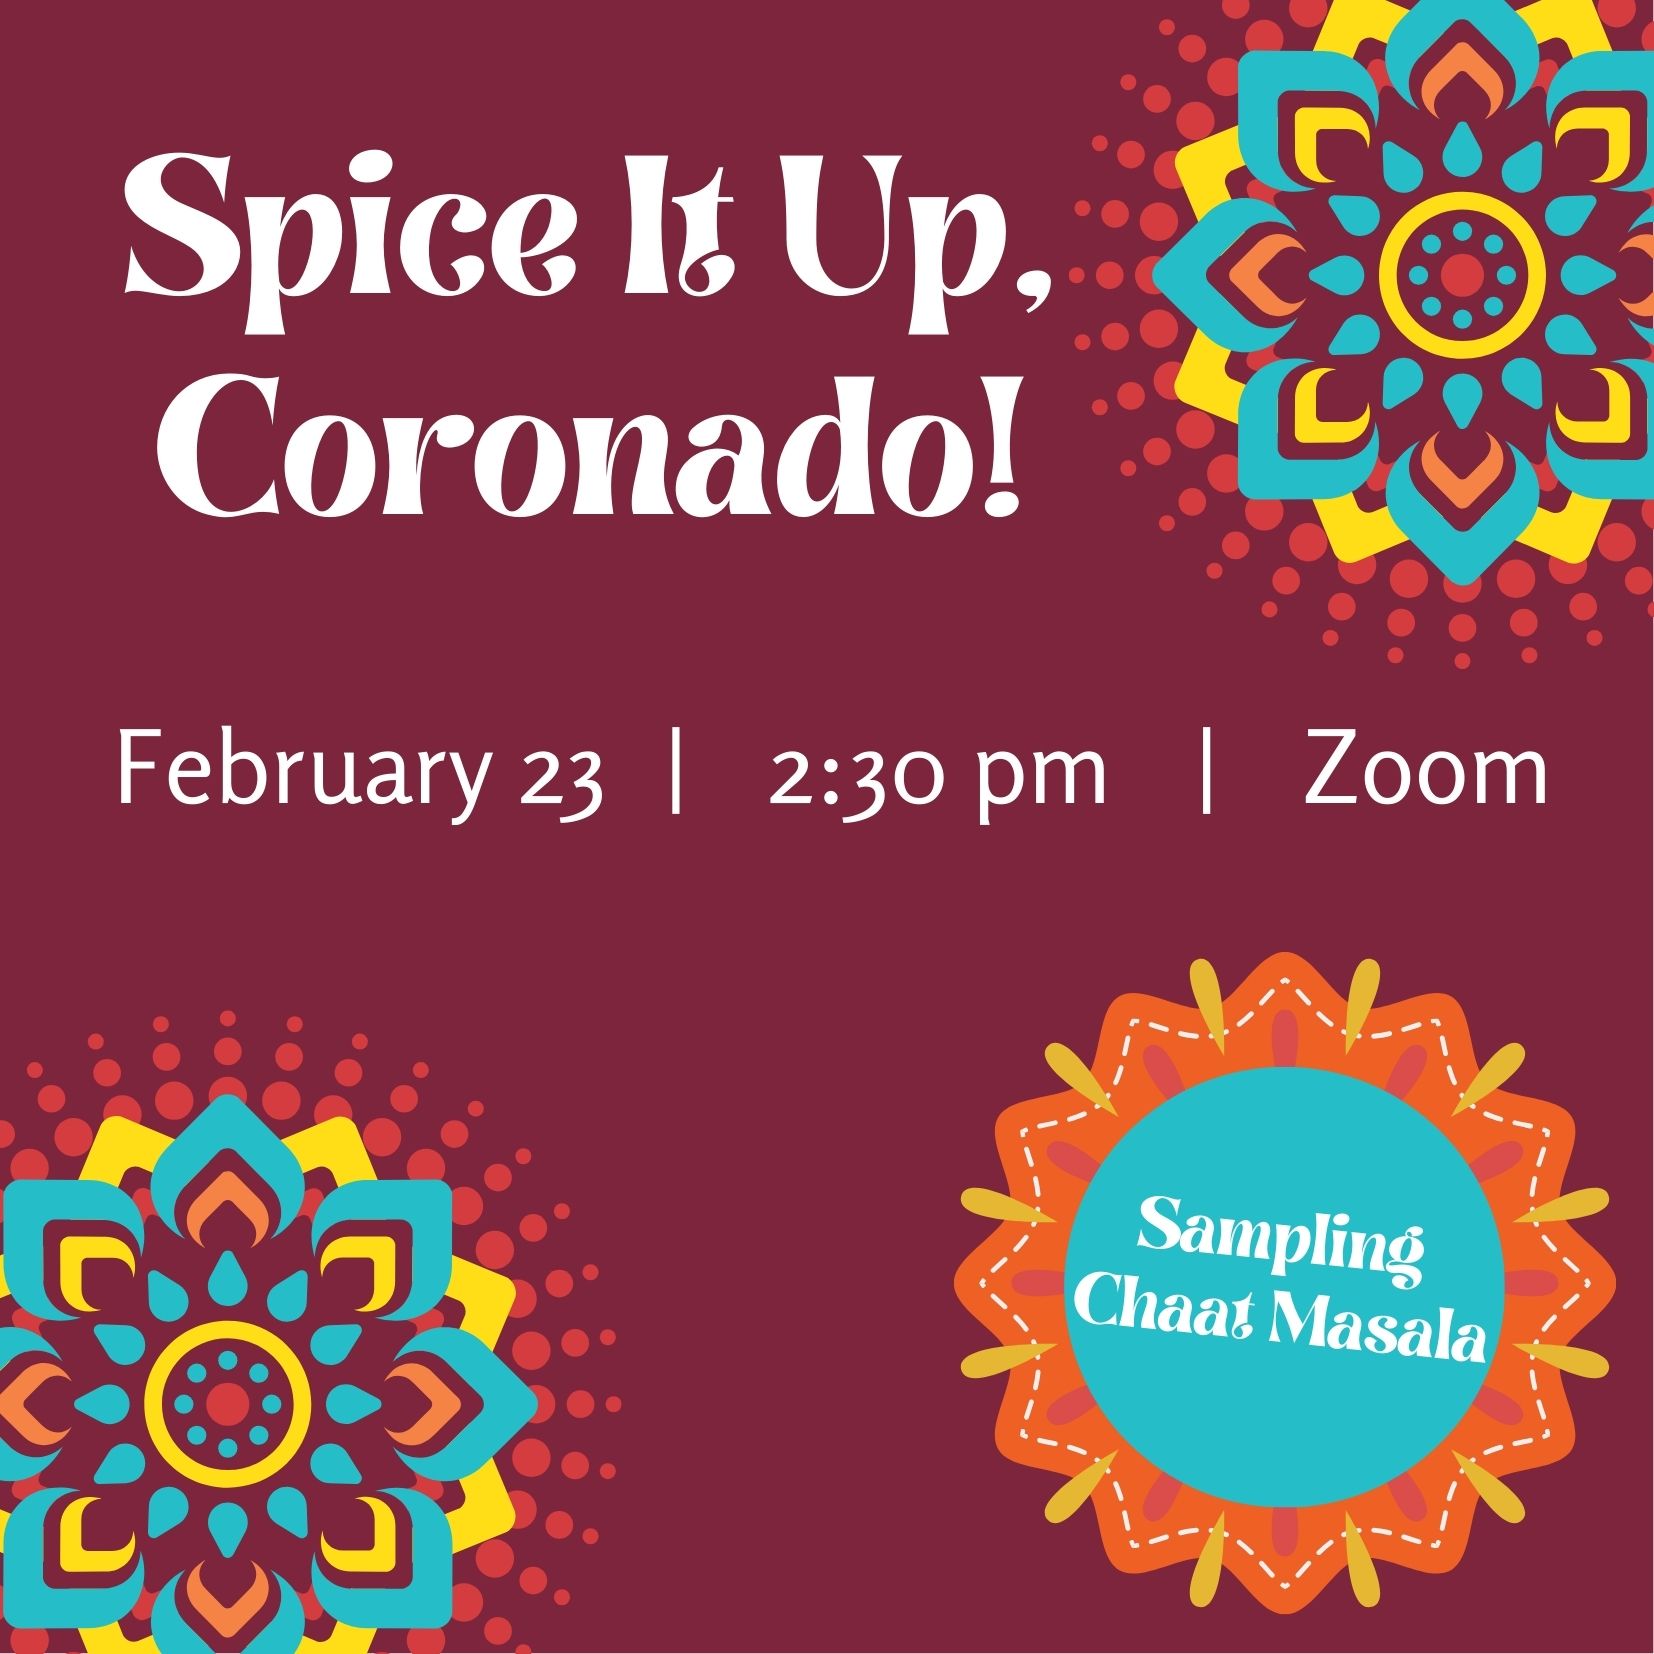 Maroon background with brightly colored star bursts. Says Spice It Up, Coronado / February 23 | 2:30 pm | Zoom / Sampling Chaat Masala 